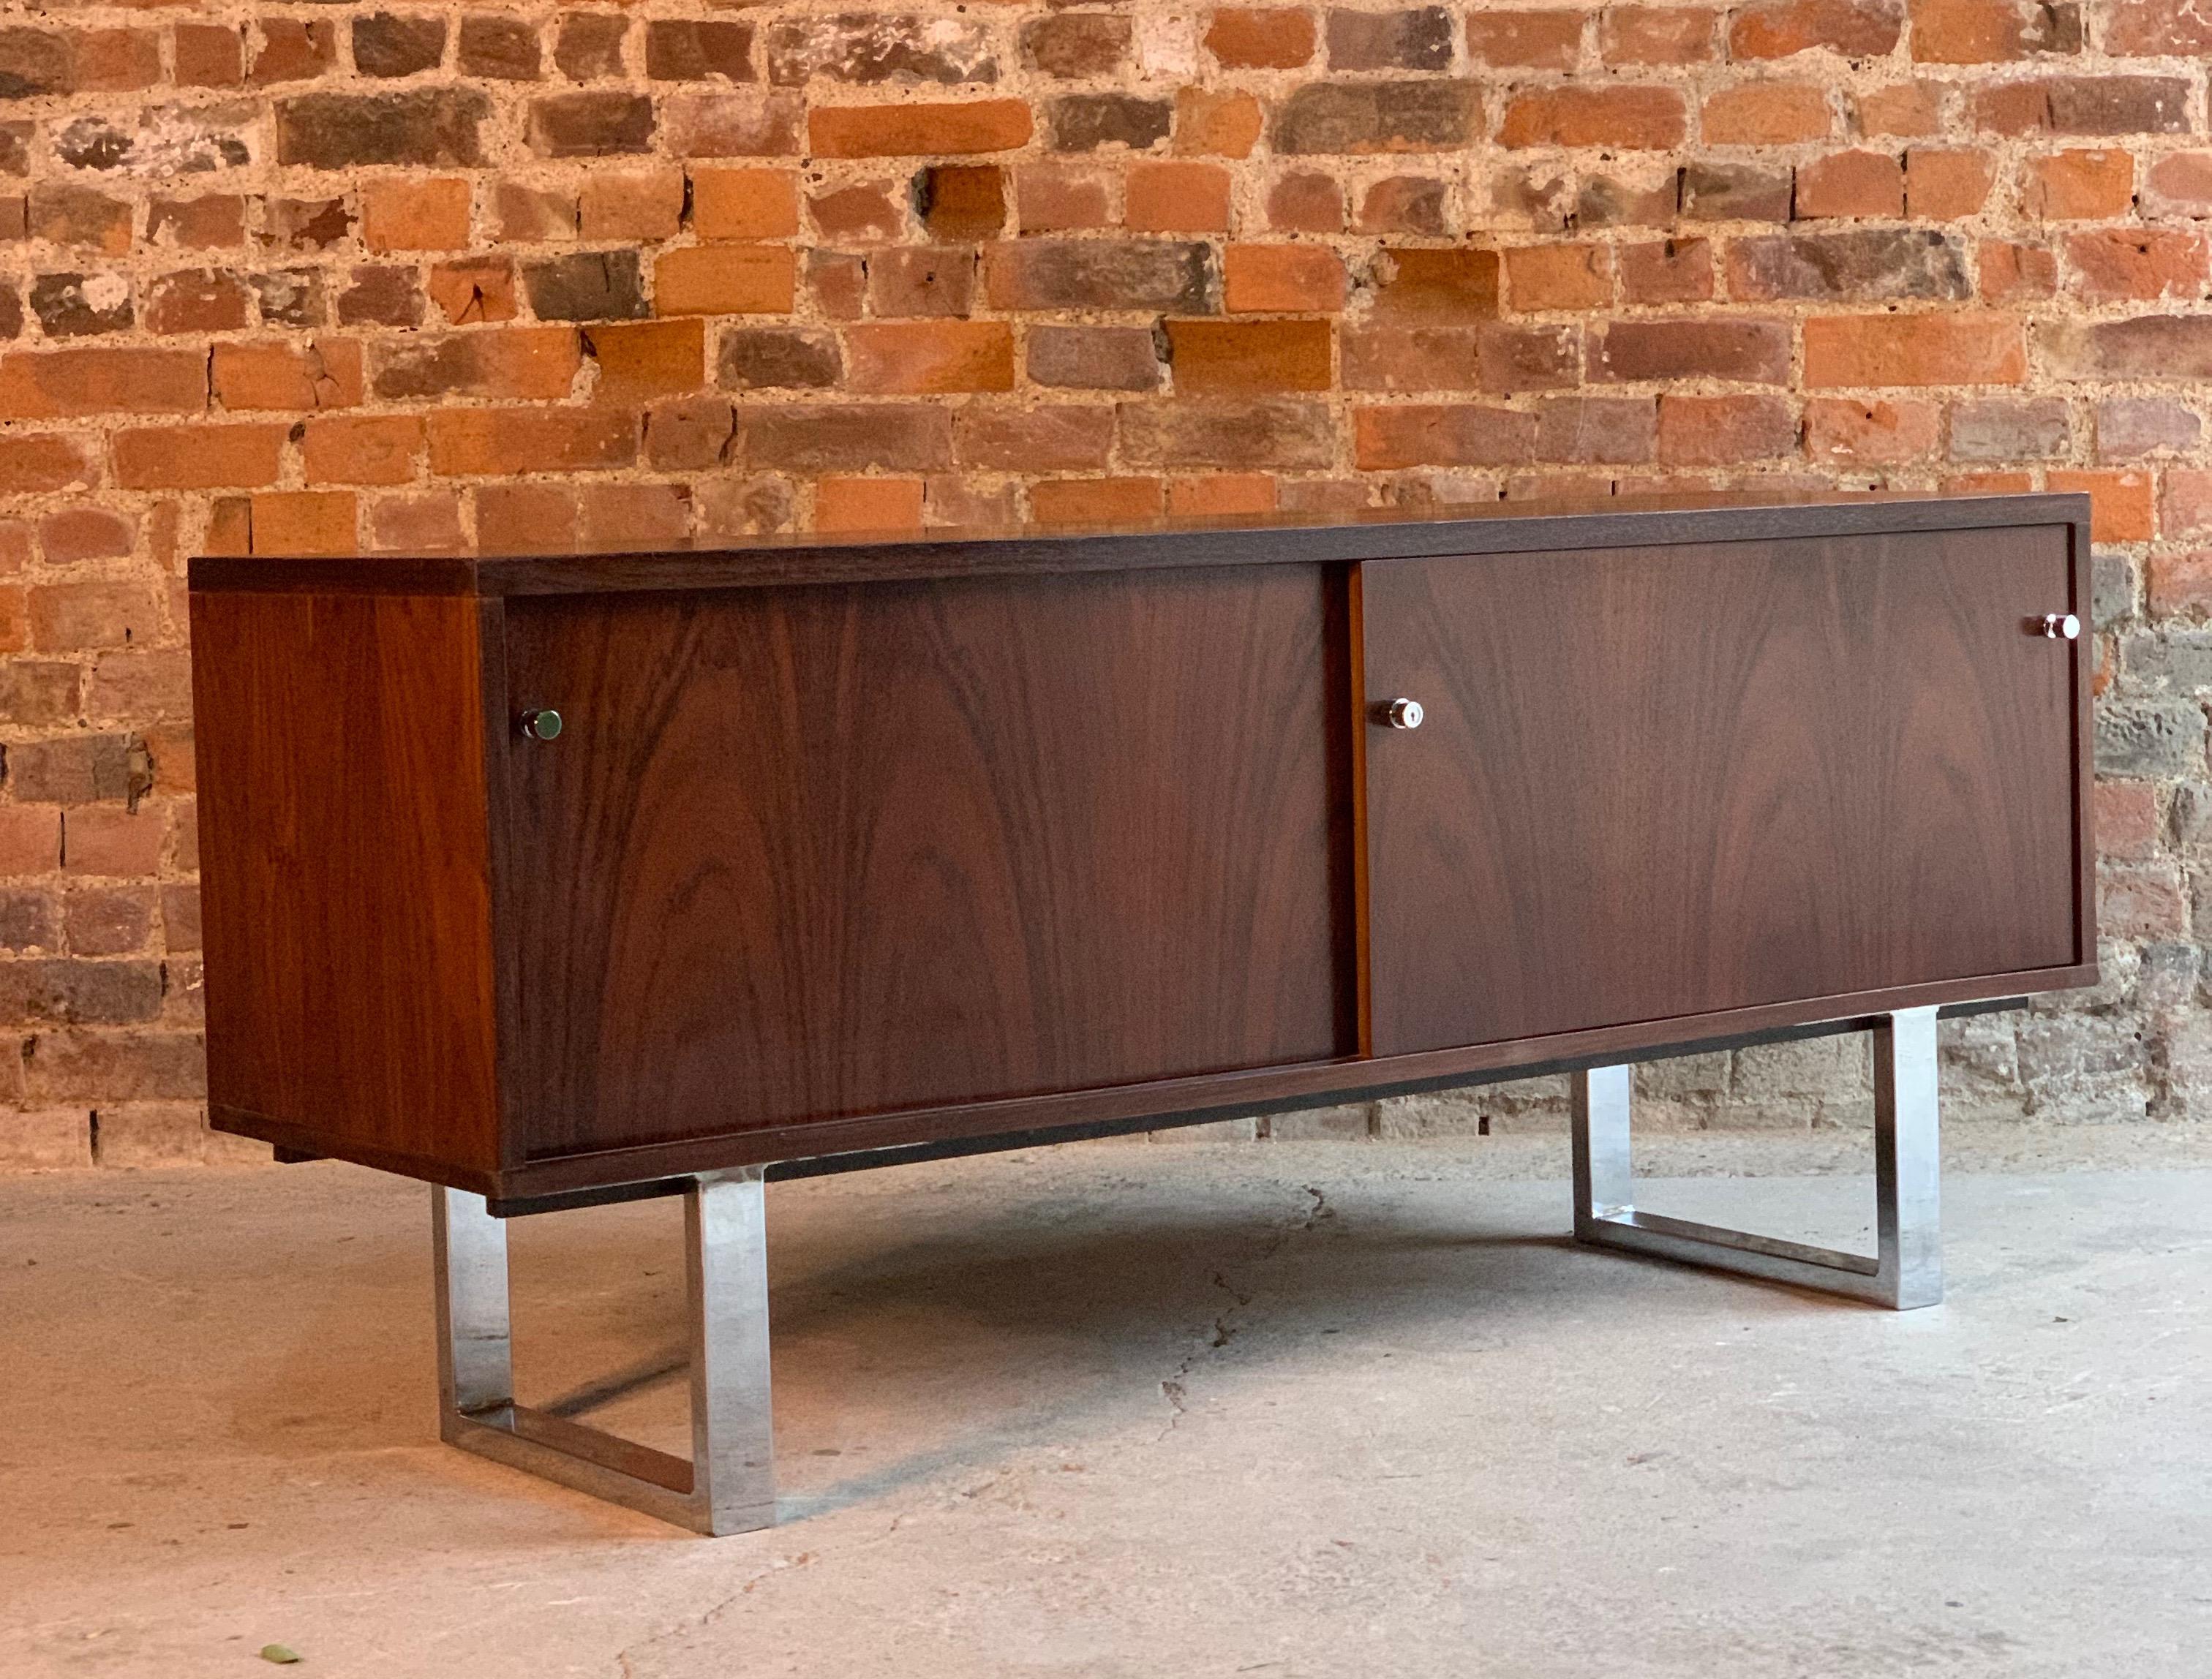 Gordon Russell rosewood sideboard credenza by Trevor China, chrome sled legs, circa 1970

Midcentury rosewood credenza sideboard by Trevor Chinn for Gordon Russell circa 1970, constructed from rosewood and raised on chrome sleigh legs, the